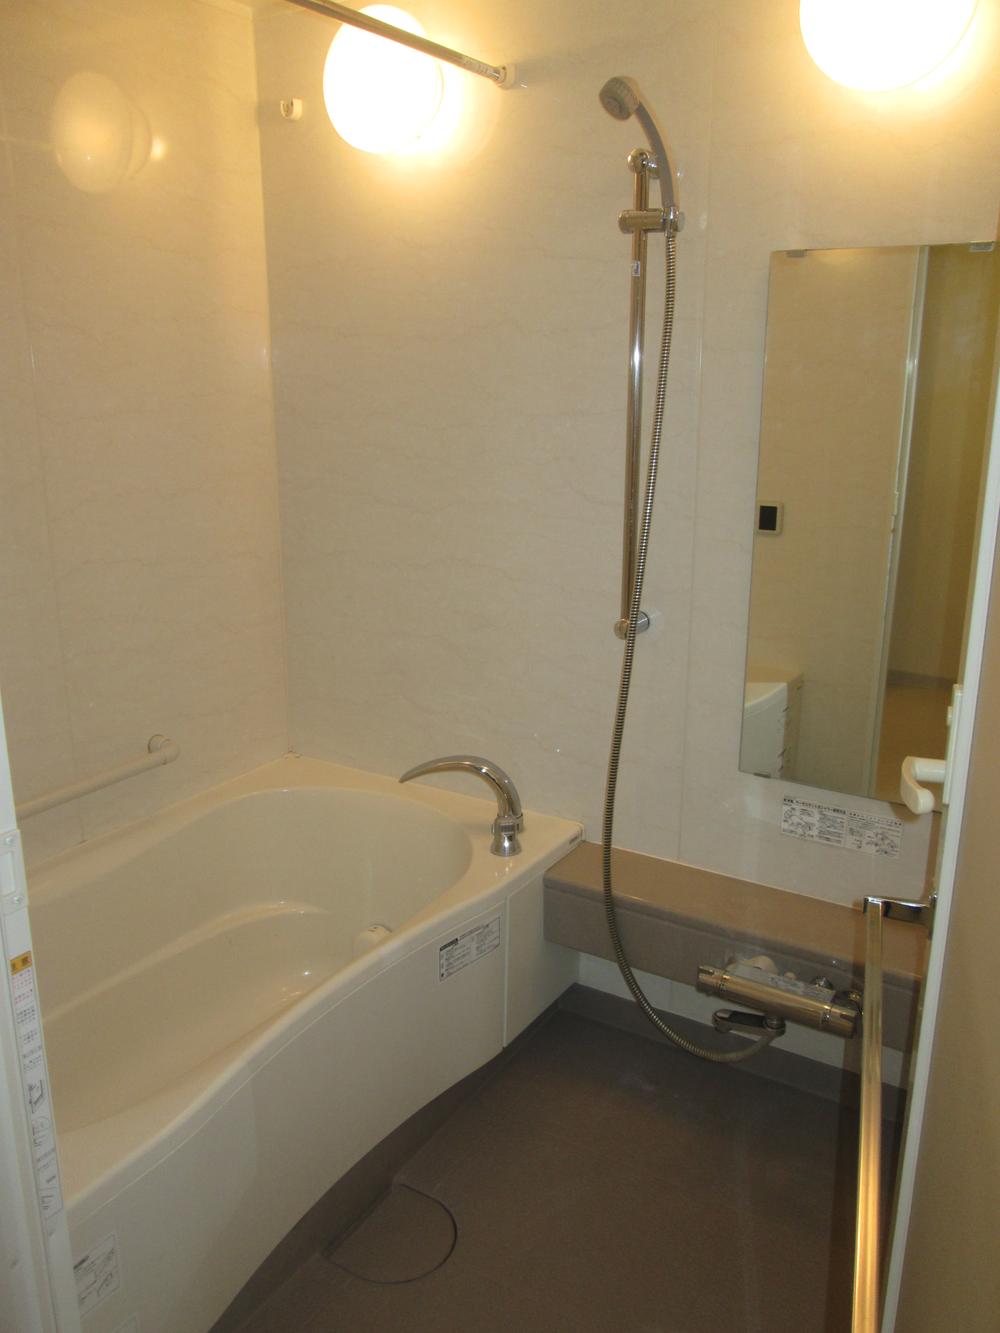 Bathroom. Guests will enjoy the natural hot spring in 24 hours your home. Bathroom with heating dryer.